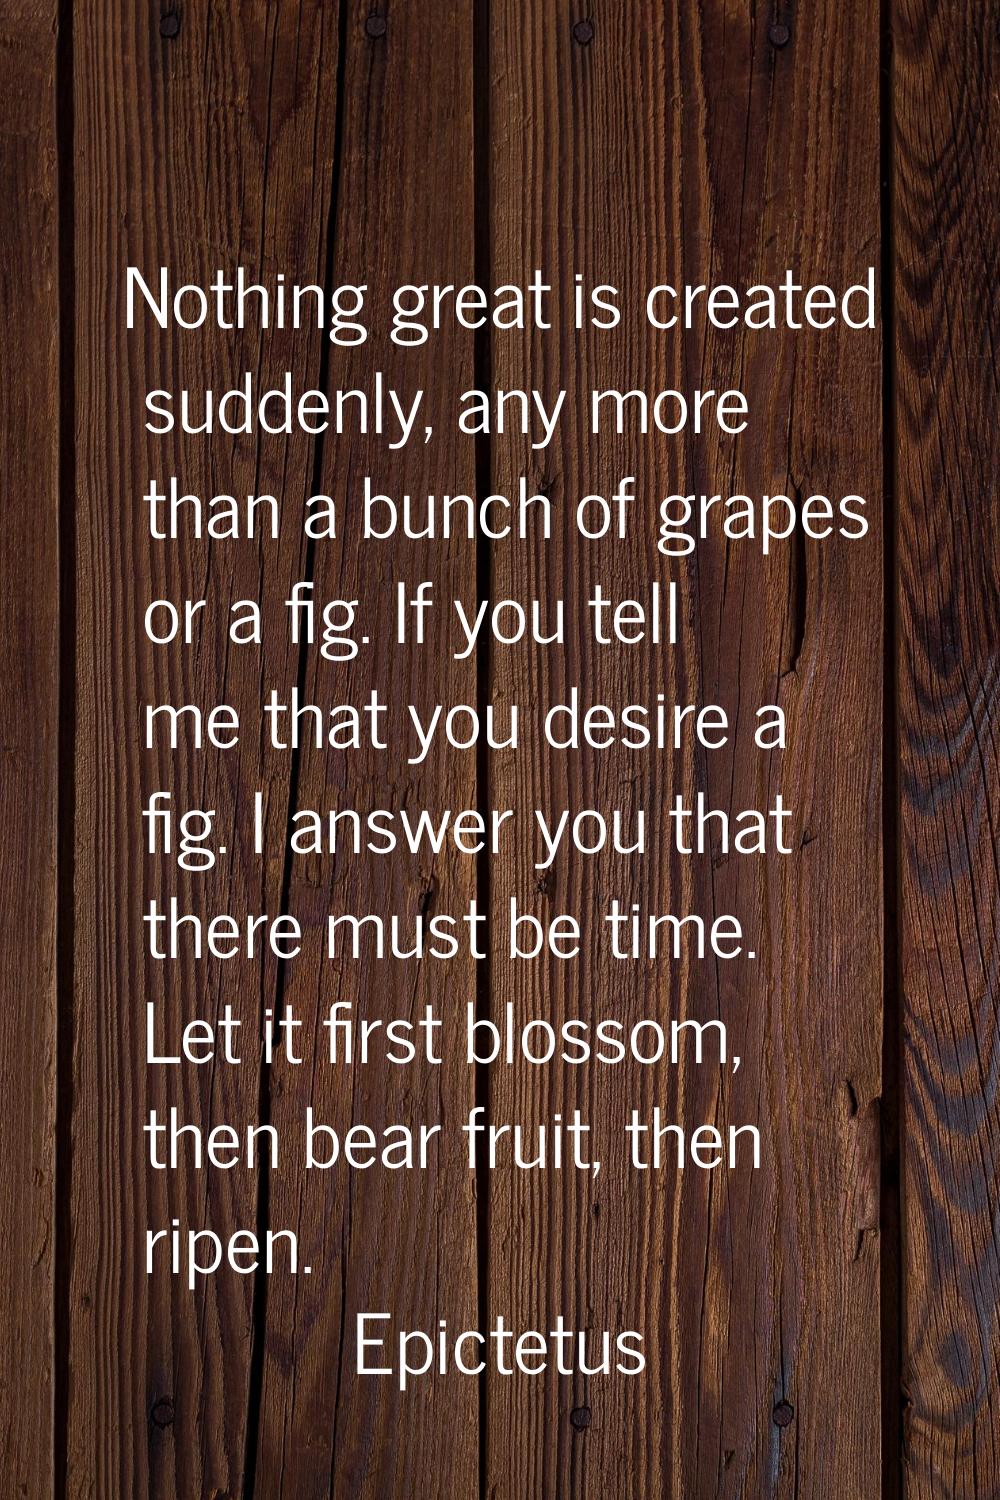 Nothing great is created suddenly, any more than a bunch of grapes or a fig. If you tell me that yo